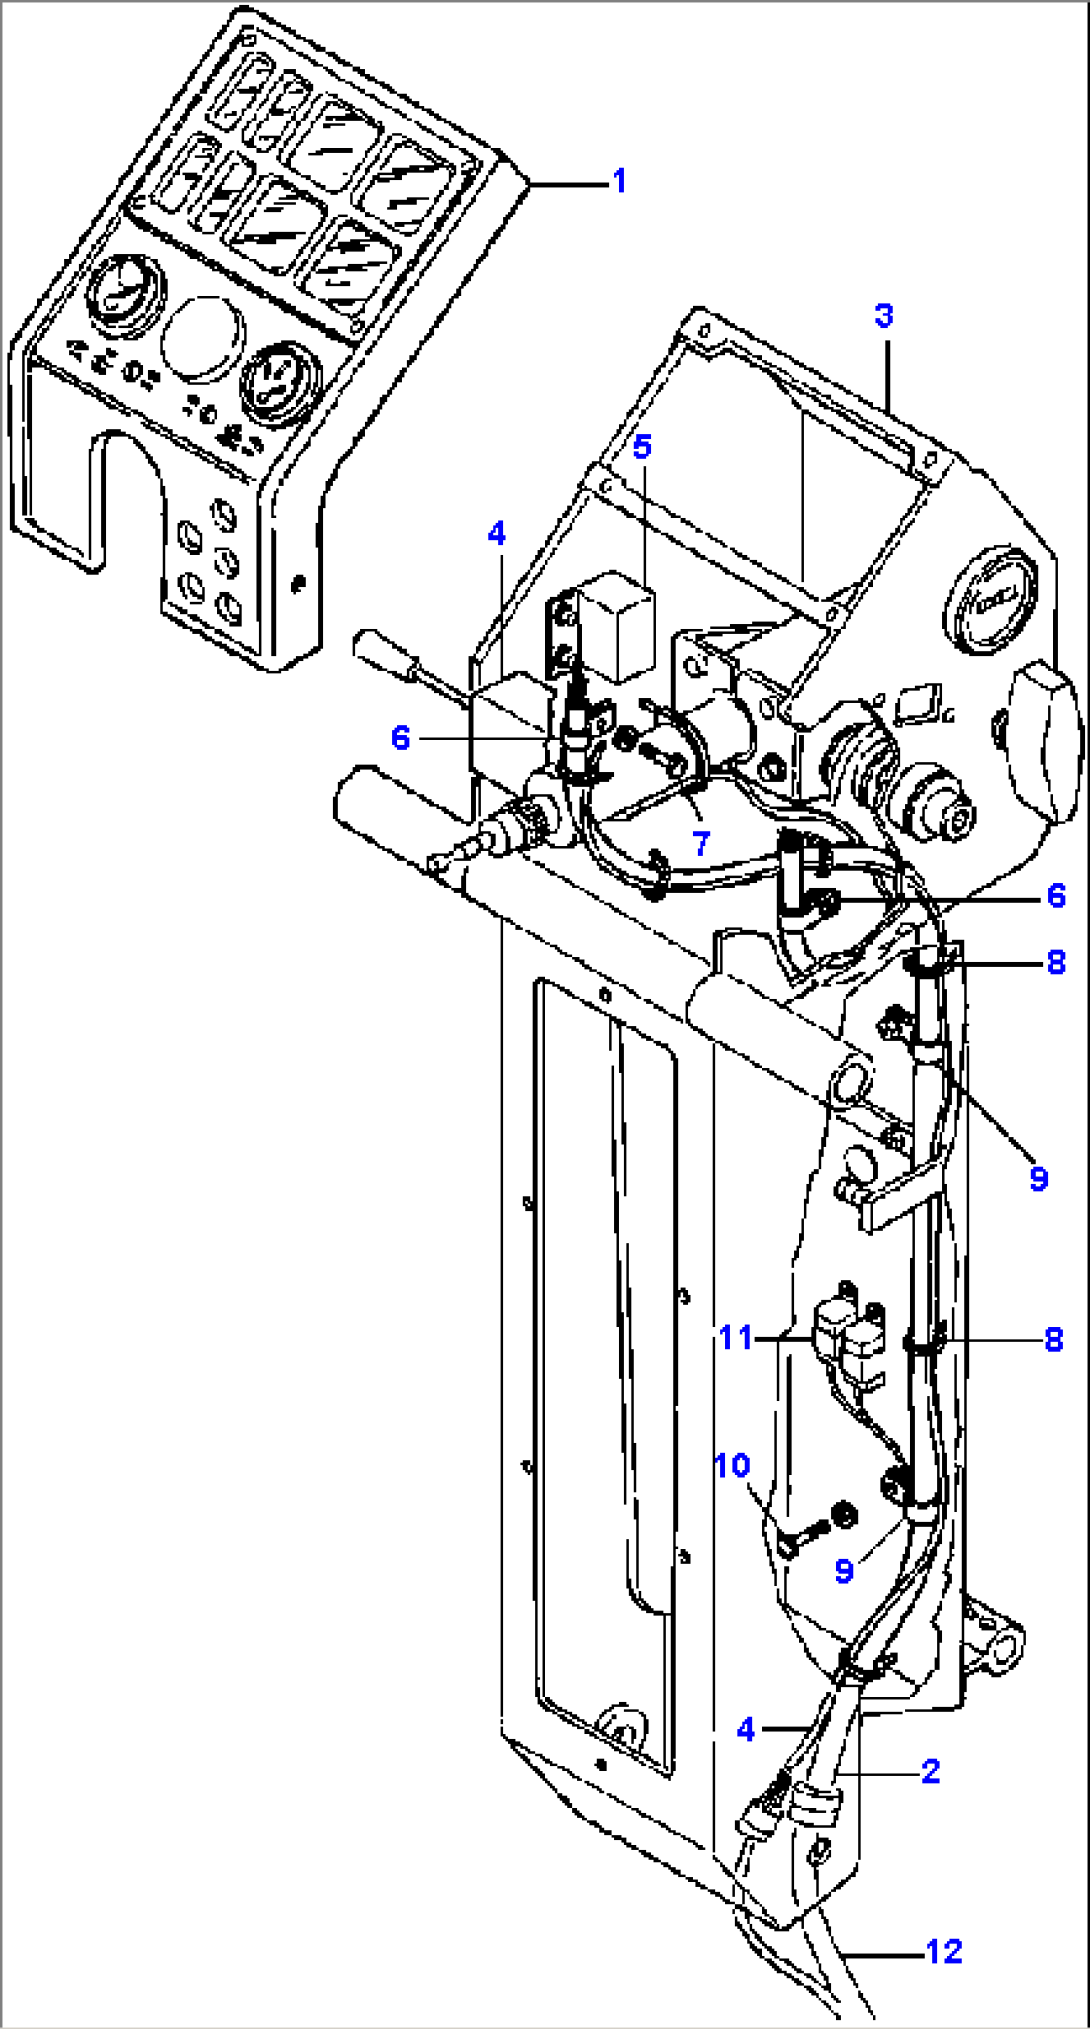 STEERING CONSOLE WIRING